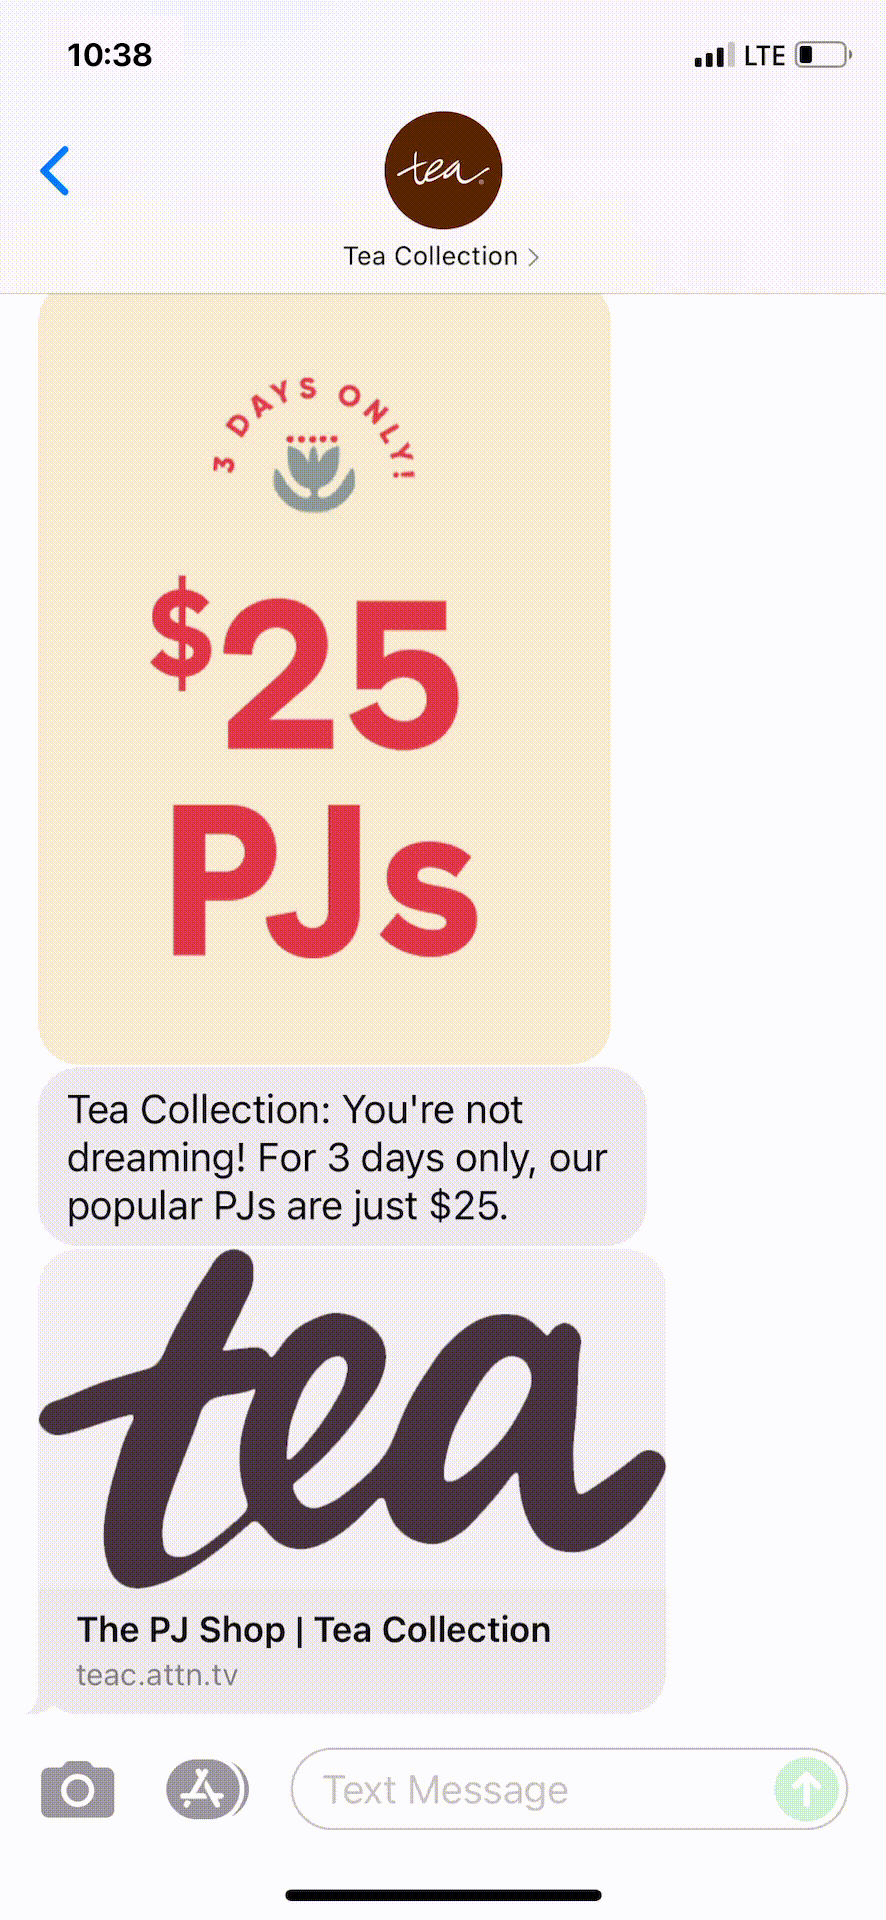 Tea-Collection-Text-Message-Marketing-Example-10.25.2021